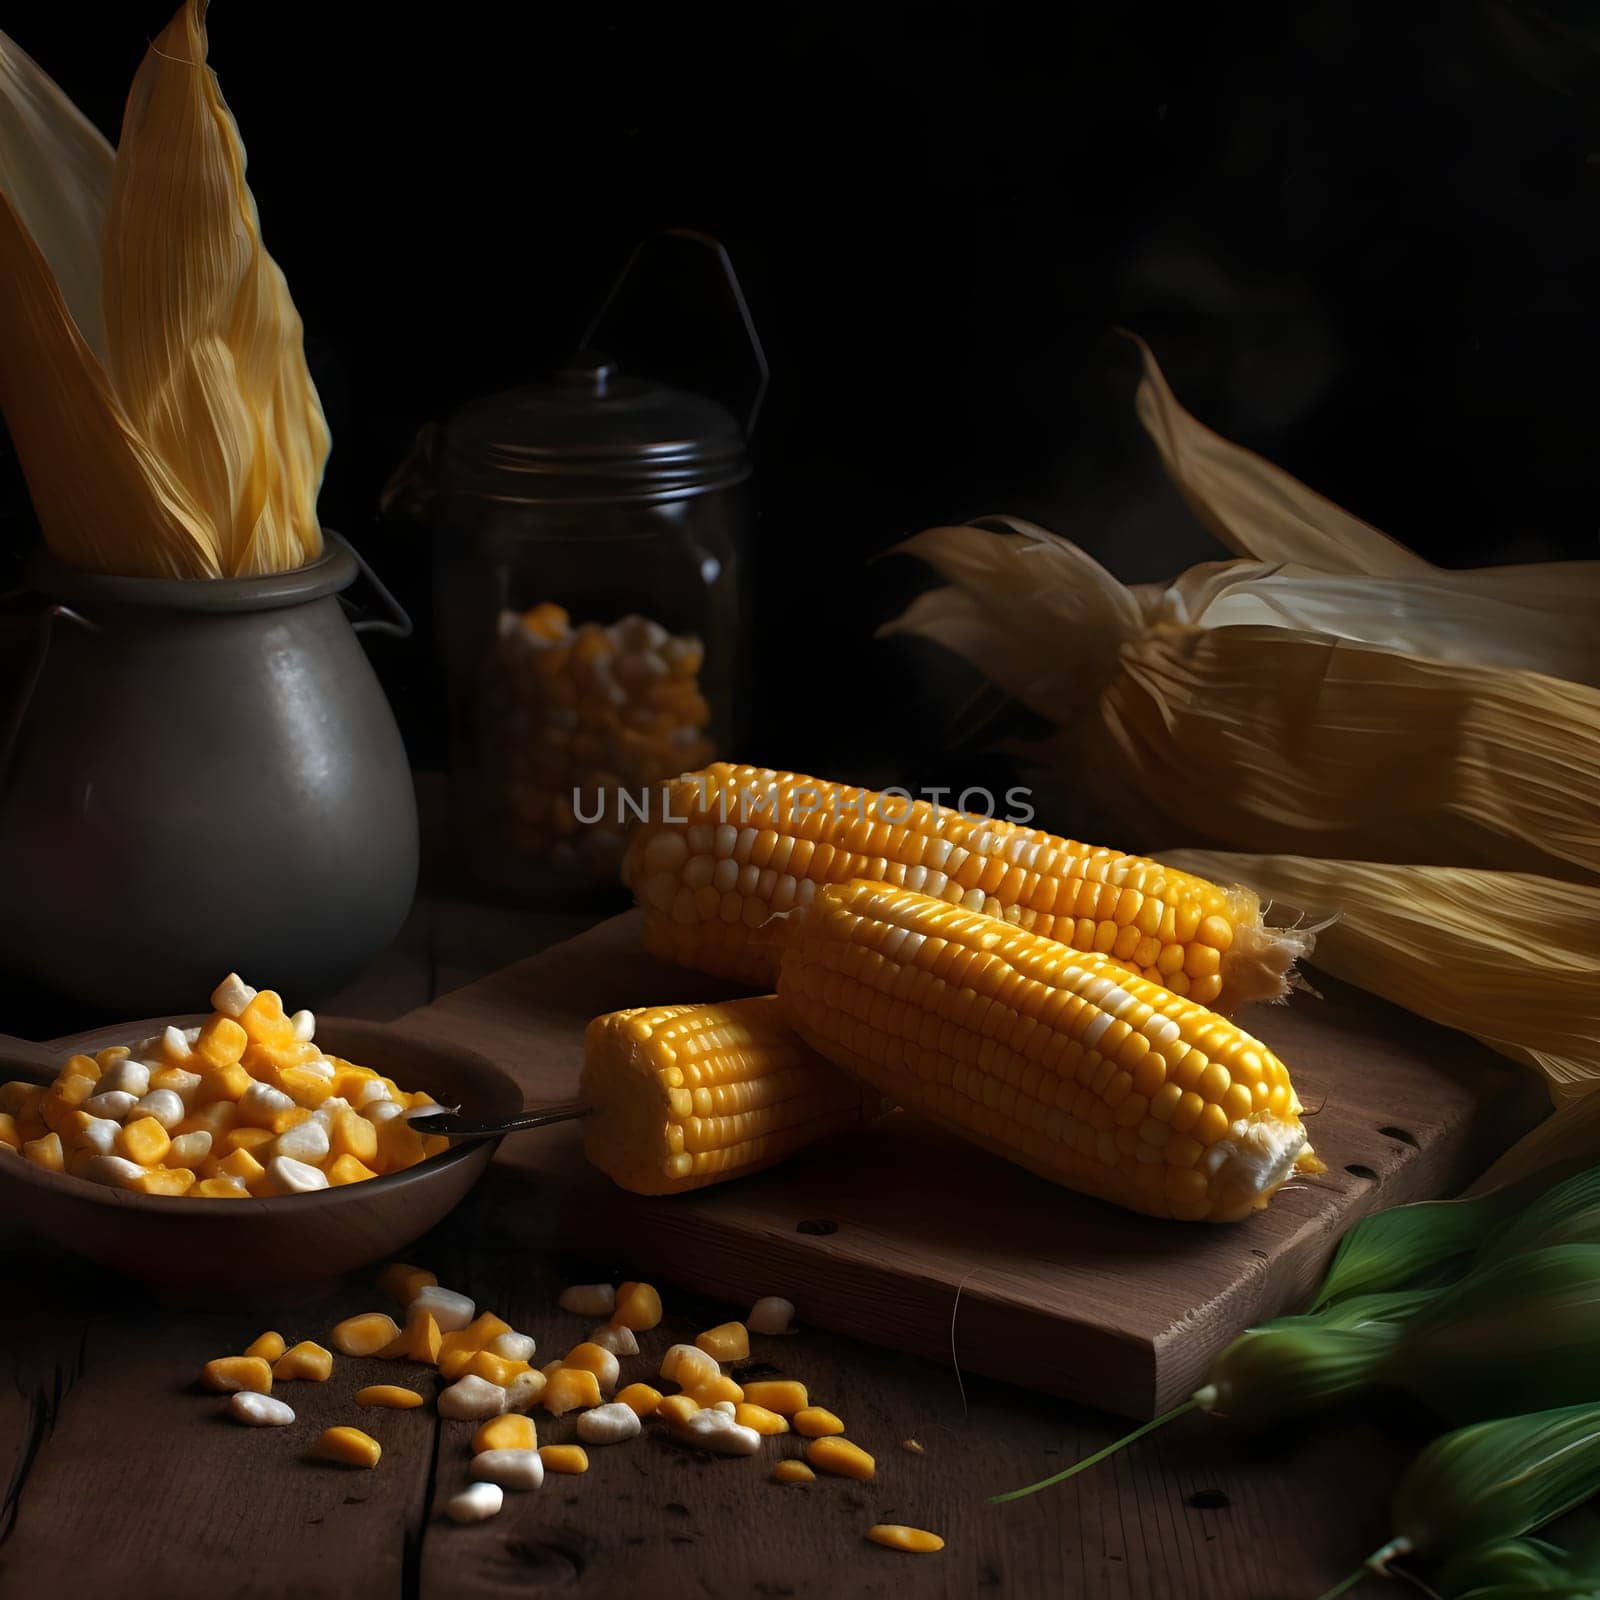 Yellow corn cobs on a kitchen board around corn kernels and leaves dark background. Corn as a dish of thanksgiving for the harvest. by ThemesS